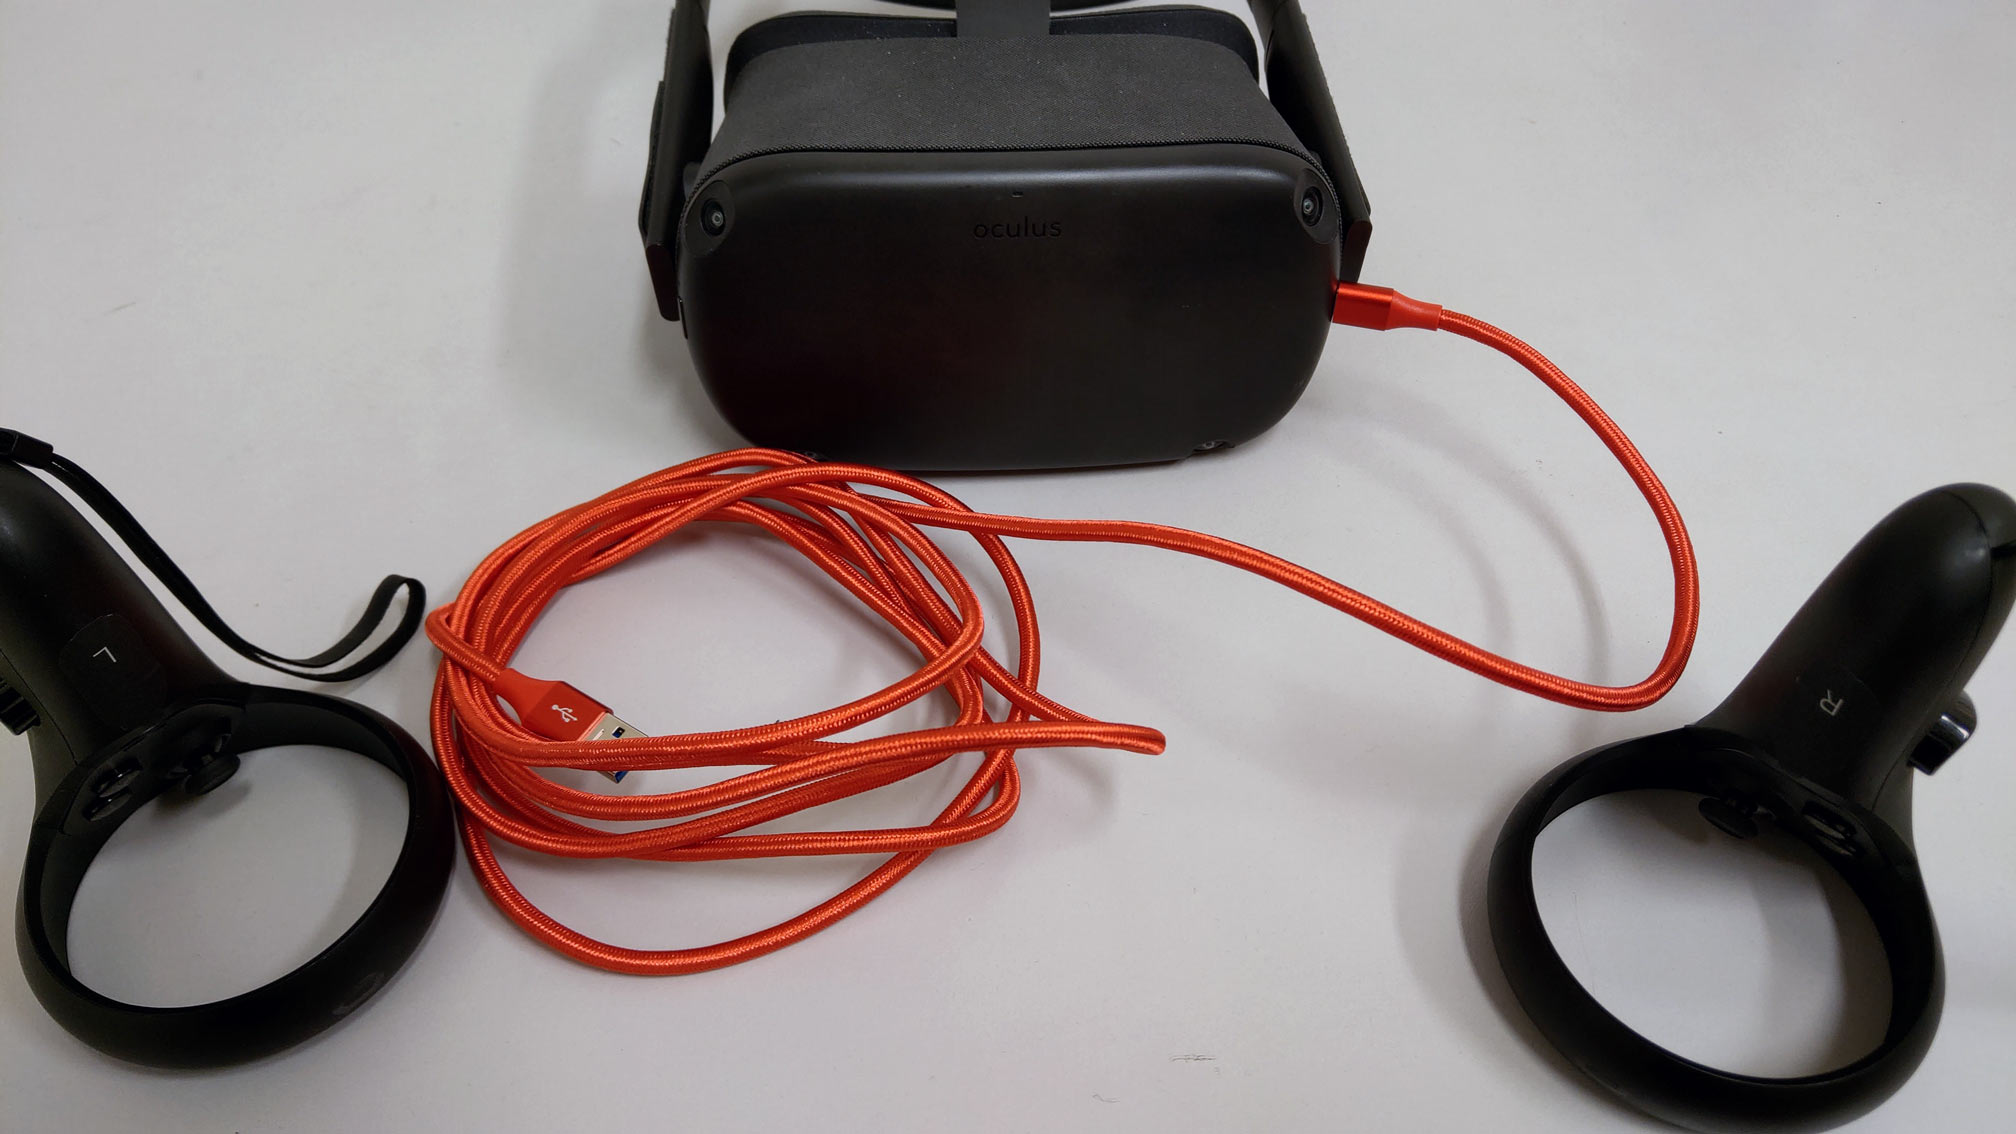 How To Increase The Cable Length On Oculus Rift